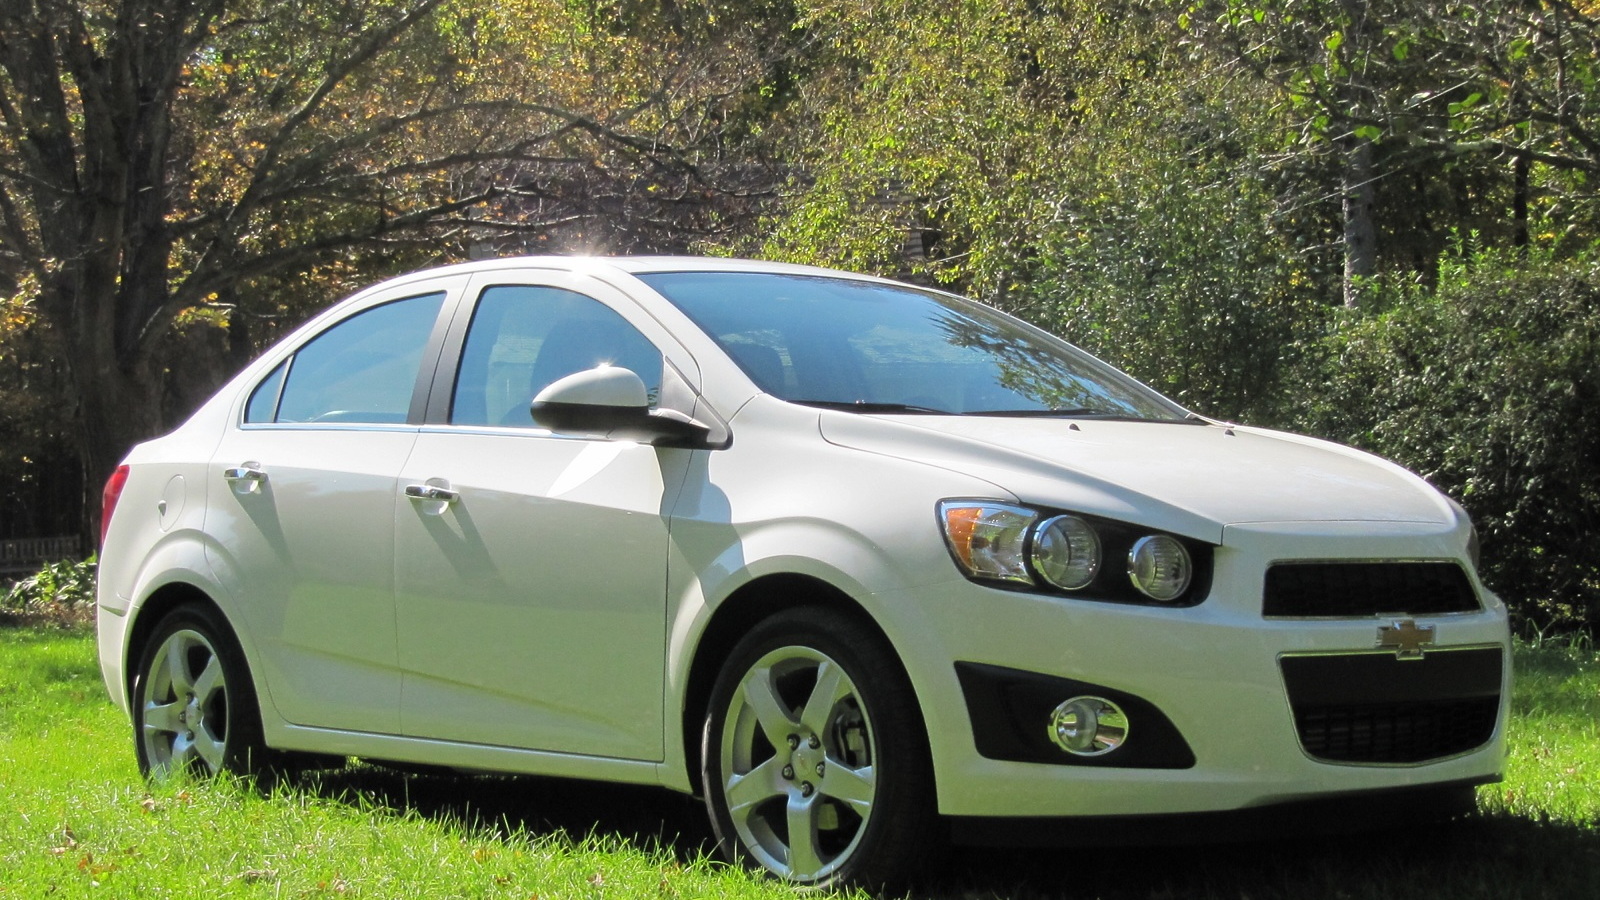 2012 Chevrolet Sonic, road test, Catskills Mountains, October 2011